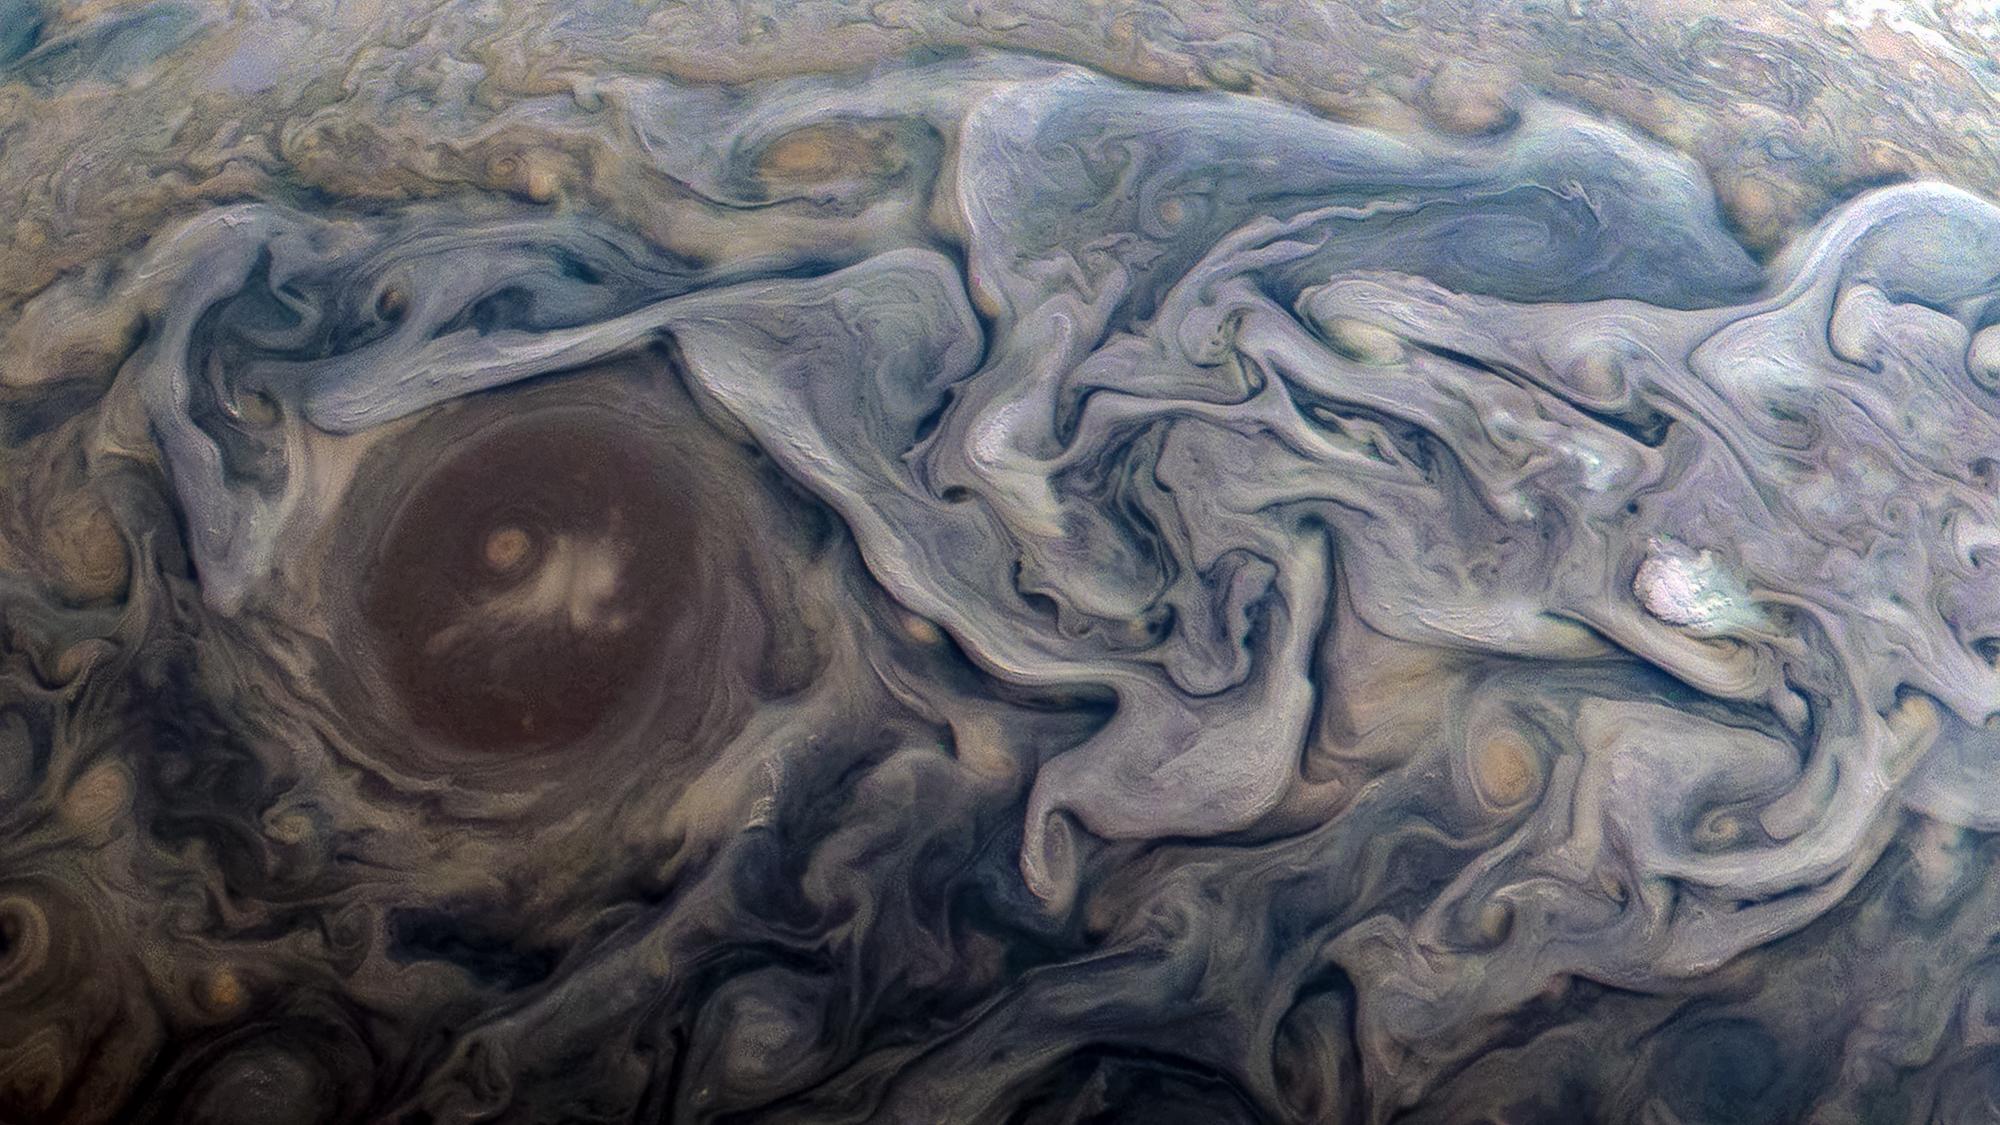 Megapixels: Jupiter’s roiling clouds are a thing of beauty